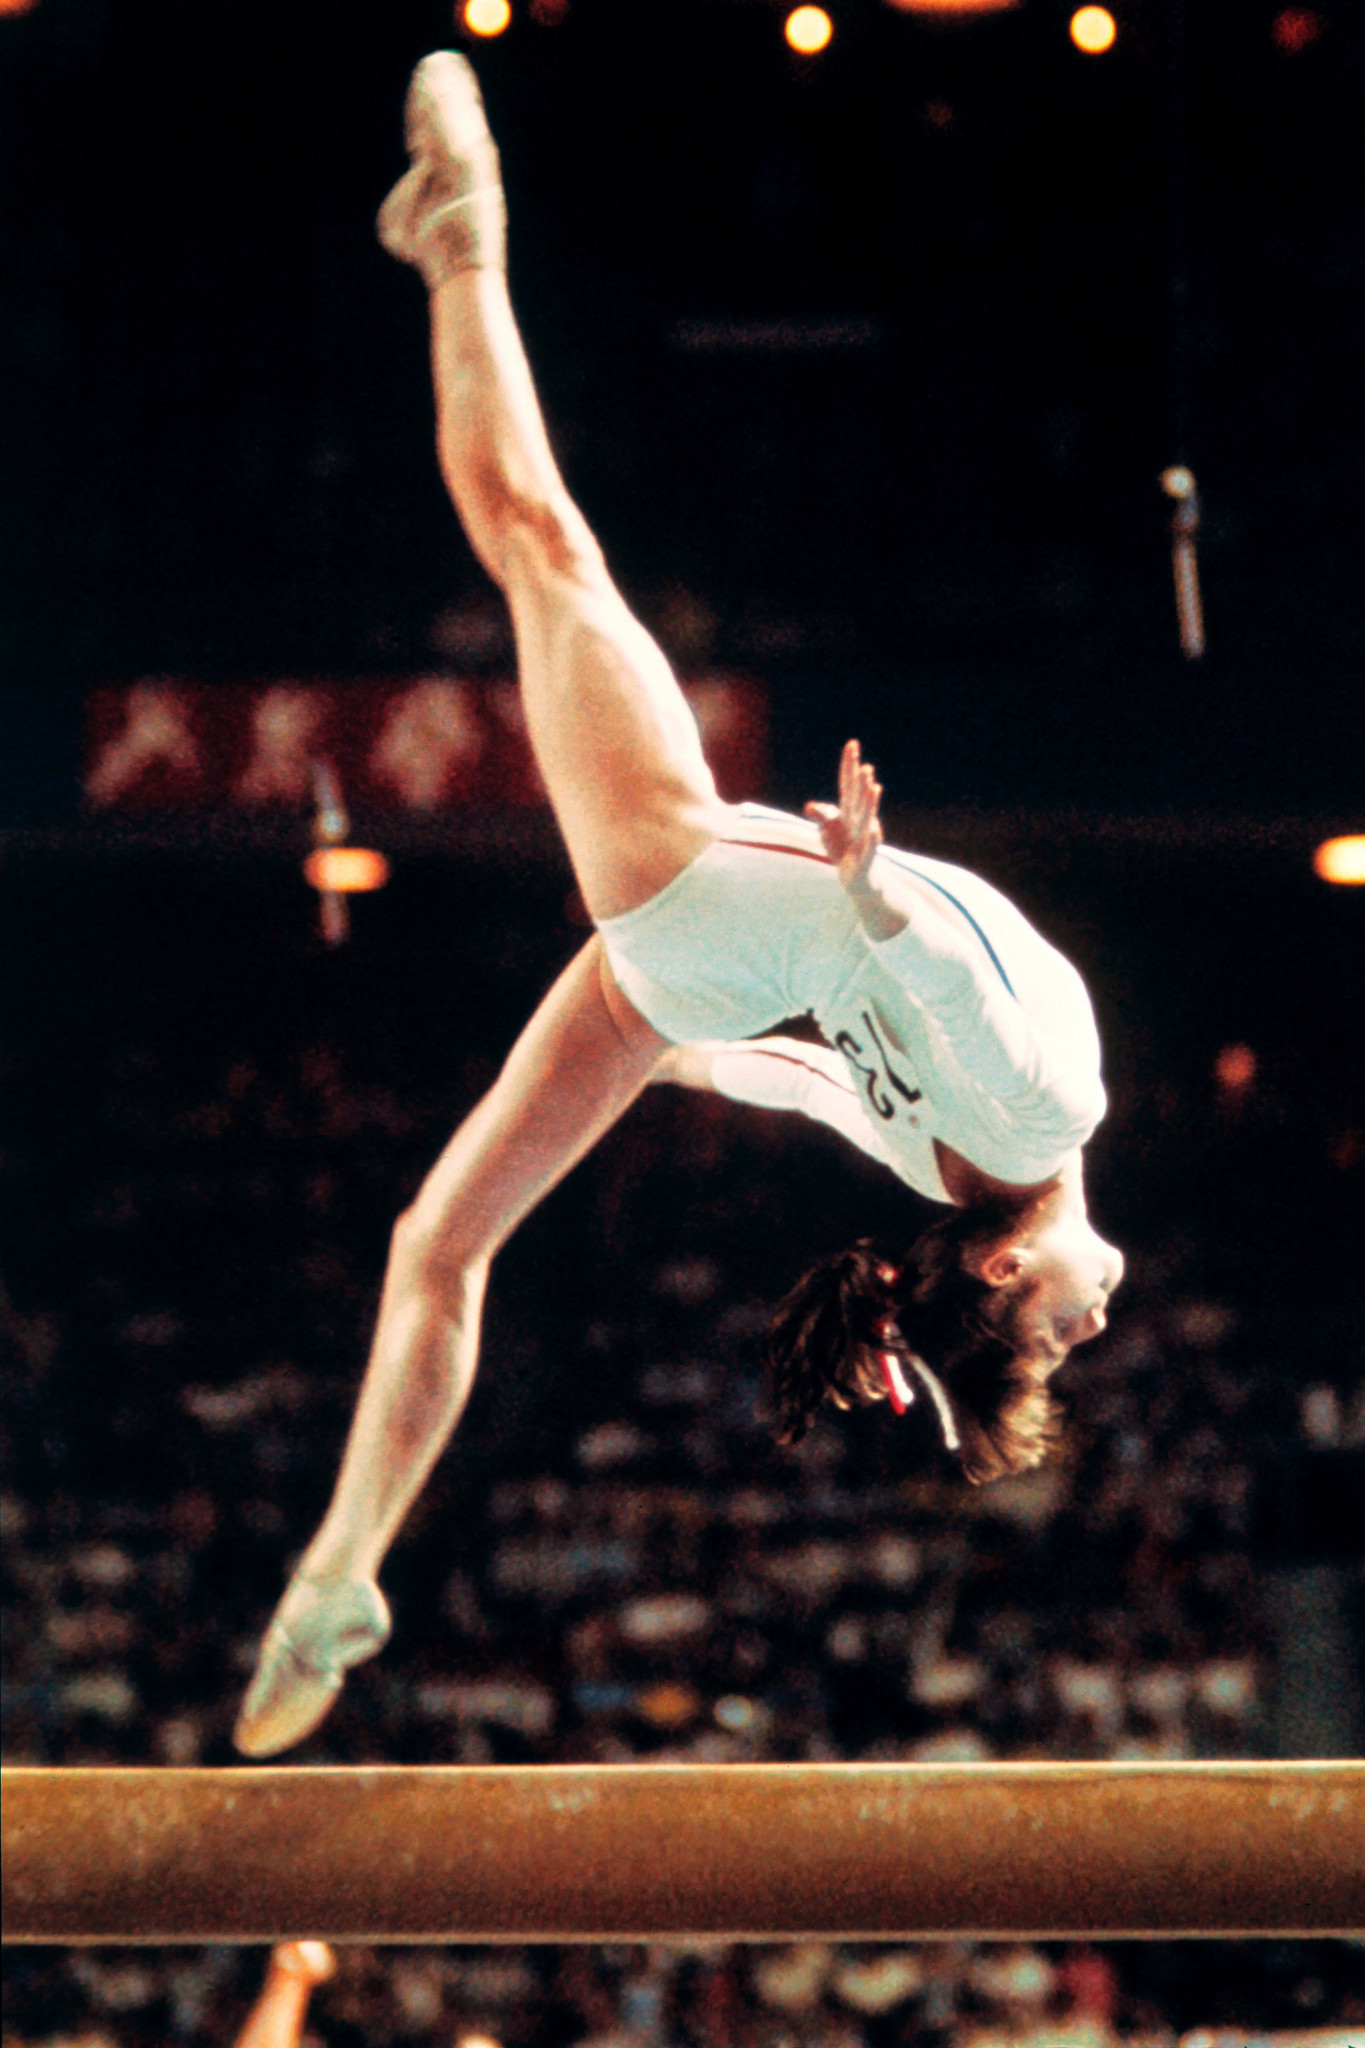 The Montreal Forum was the scene of Nadia Comăneci's astonishing performance at the 1976 Olympics when she won three gold medals and was awarded a perfect 10 five times ©Getty Images